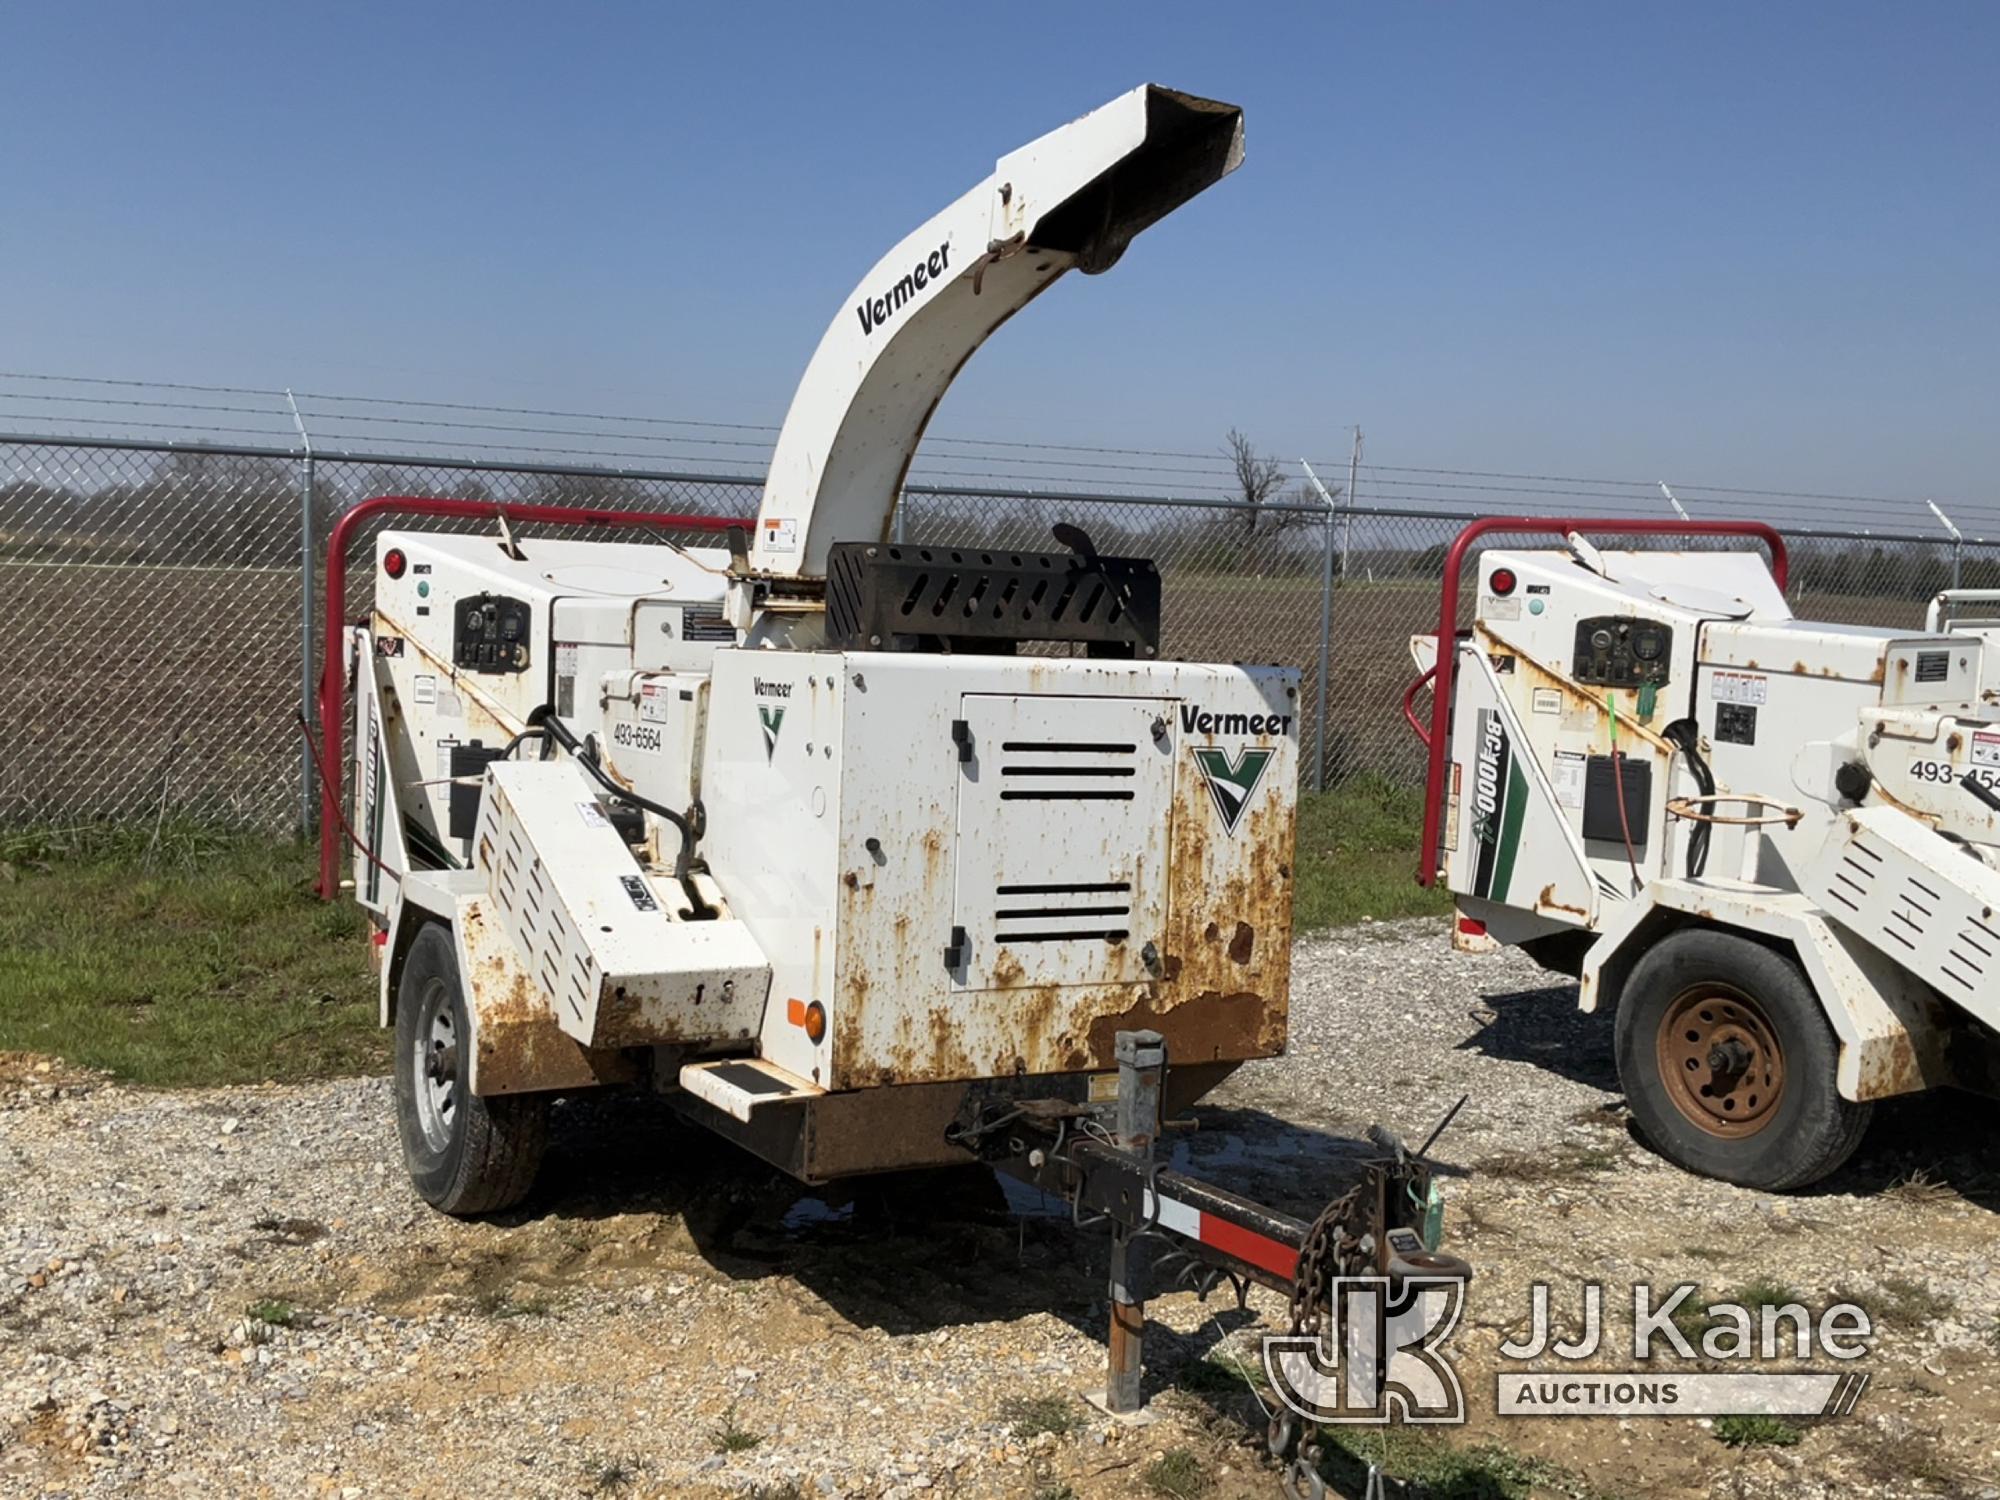 (Hawk Point, MO) 2016 Vermeer BC1000XL Chipper (12in Drum) No Title) (Runs & Operates)(Rust Damage)(